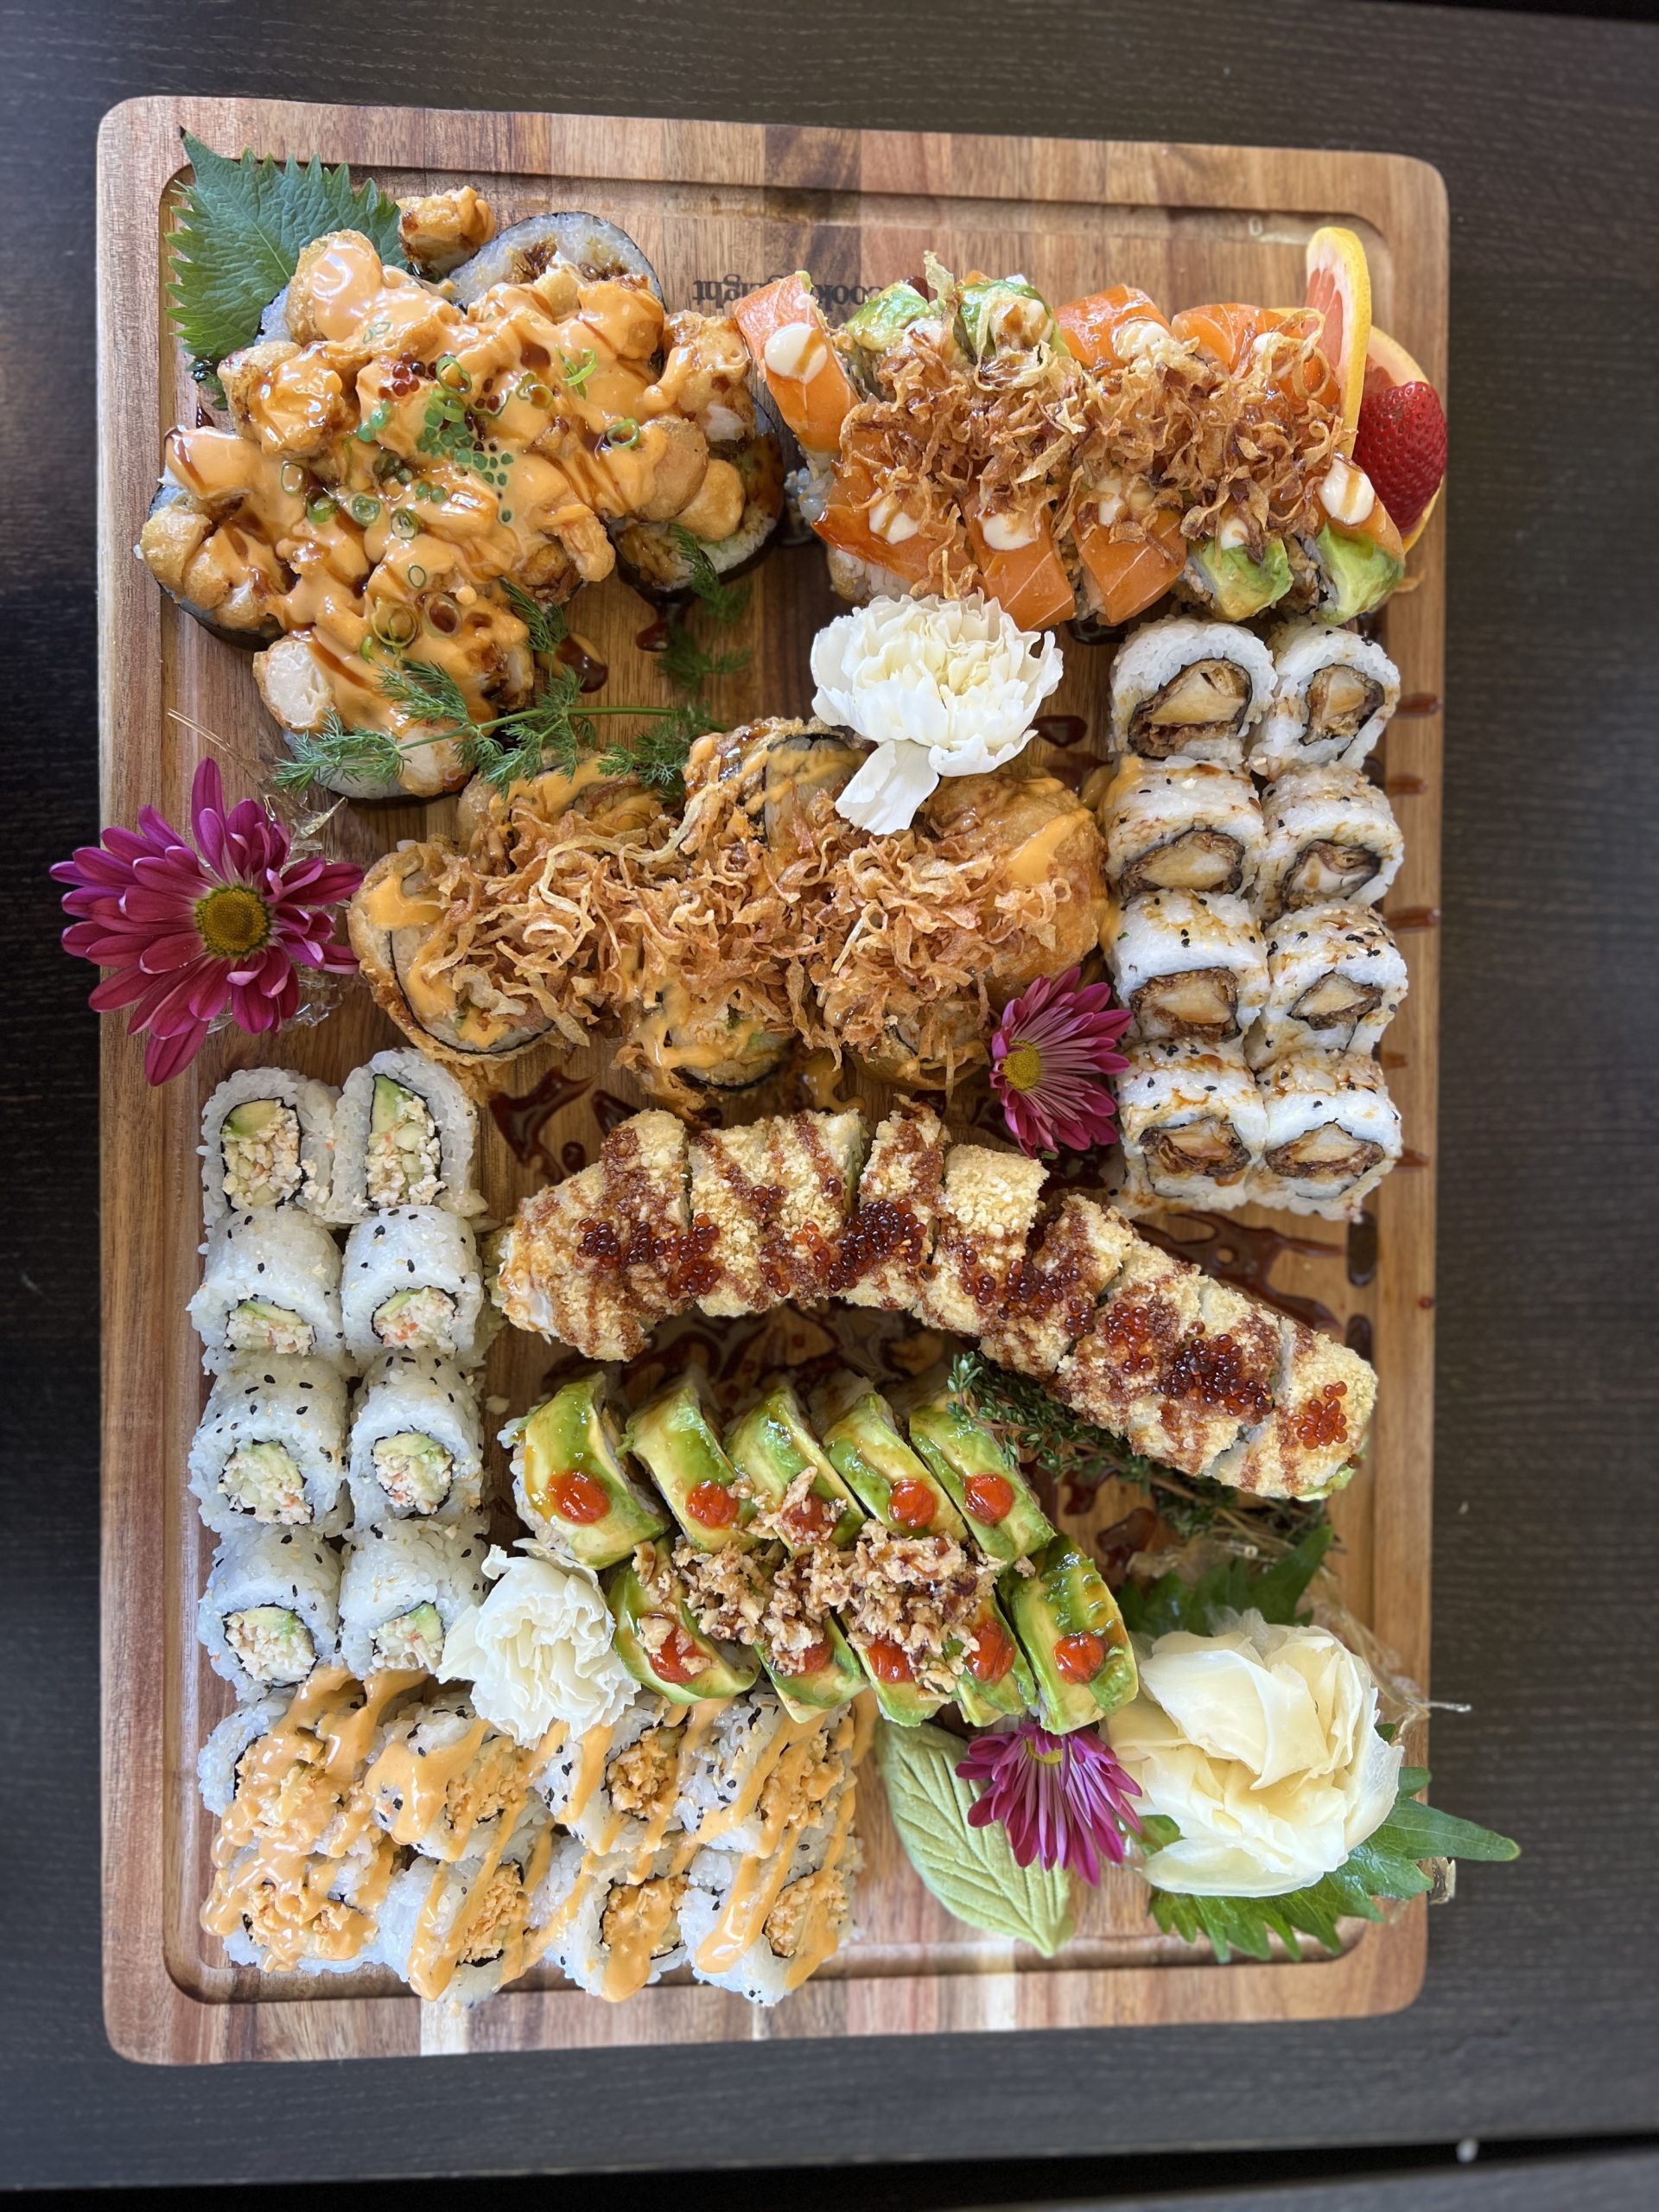 Vegan sushi from The Plant Lab